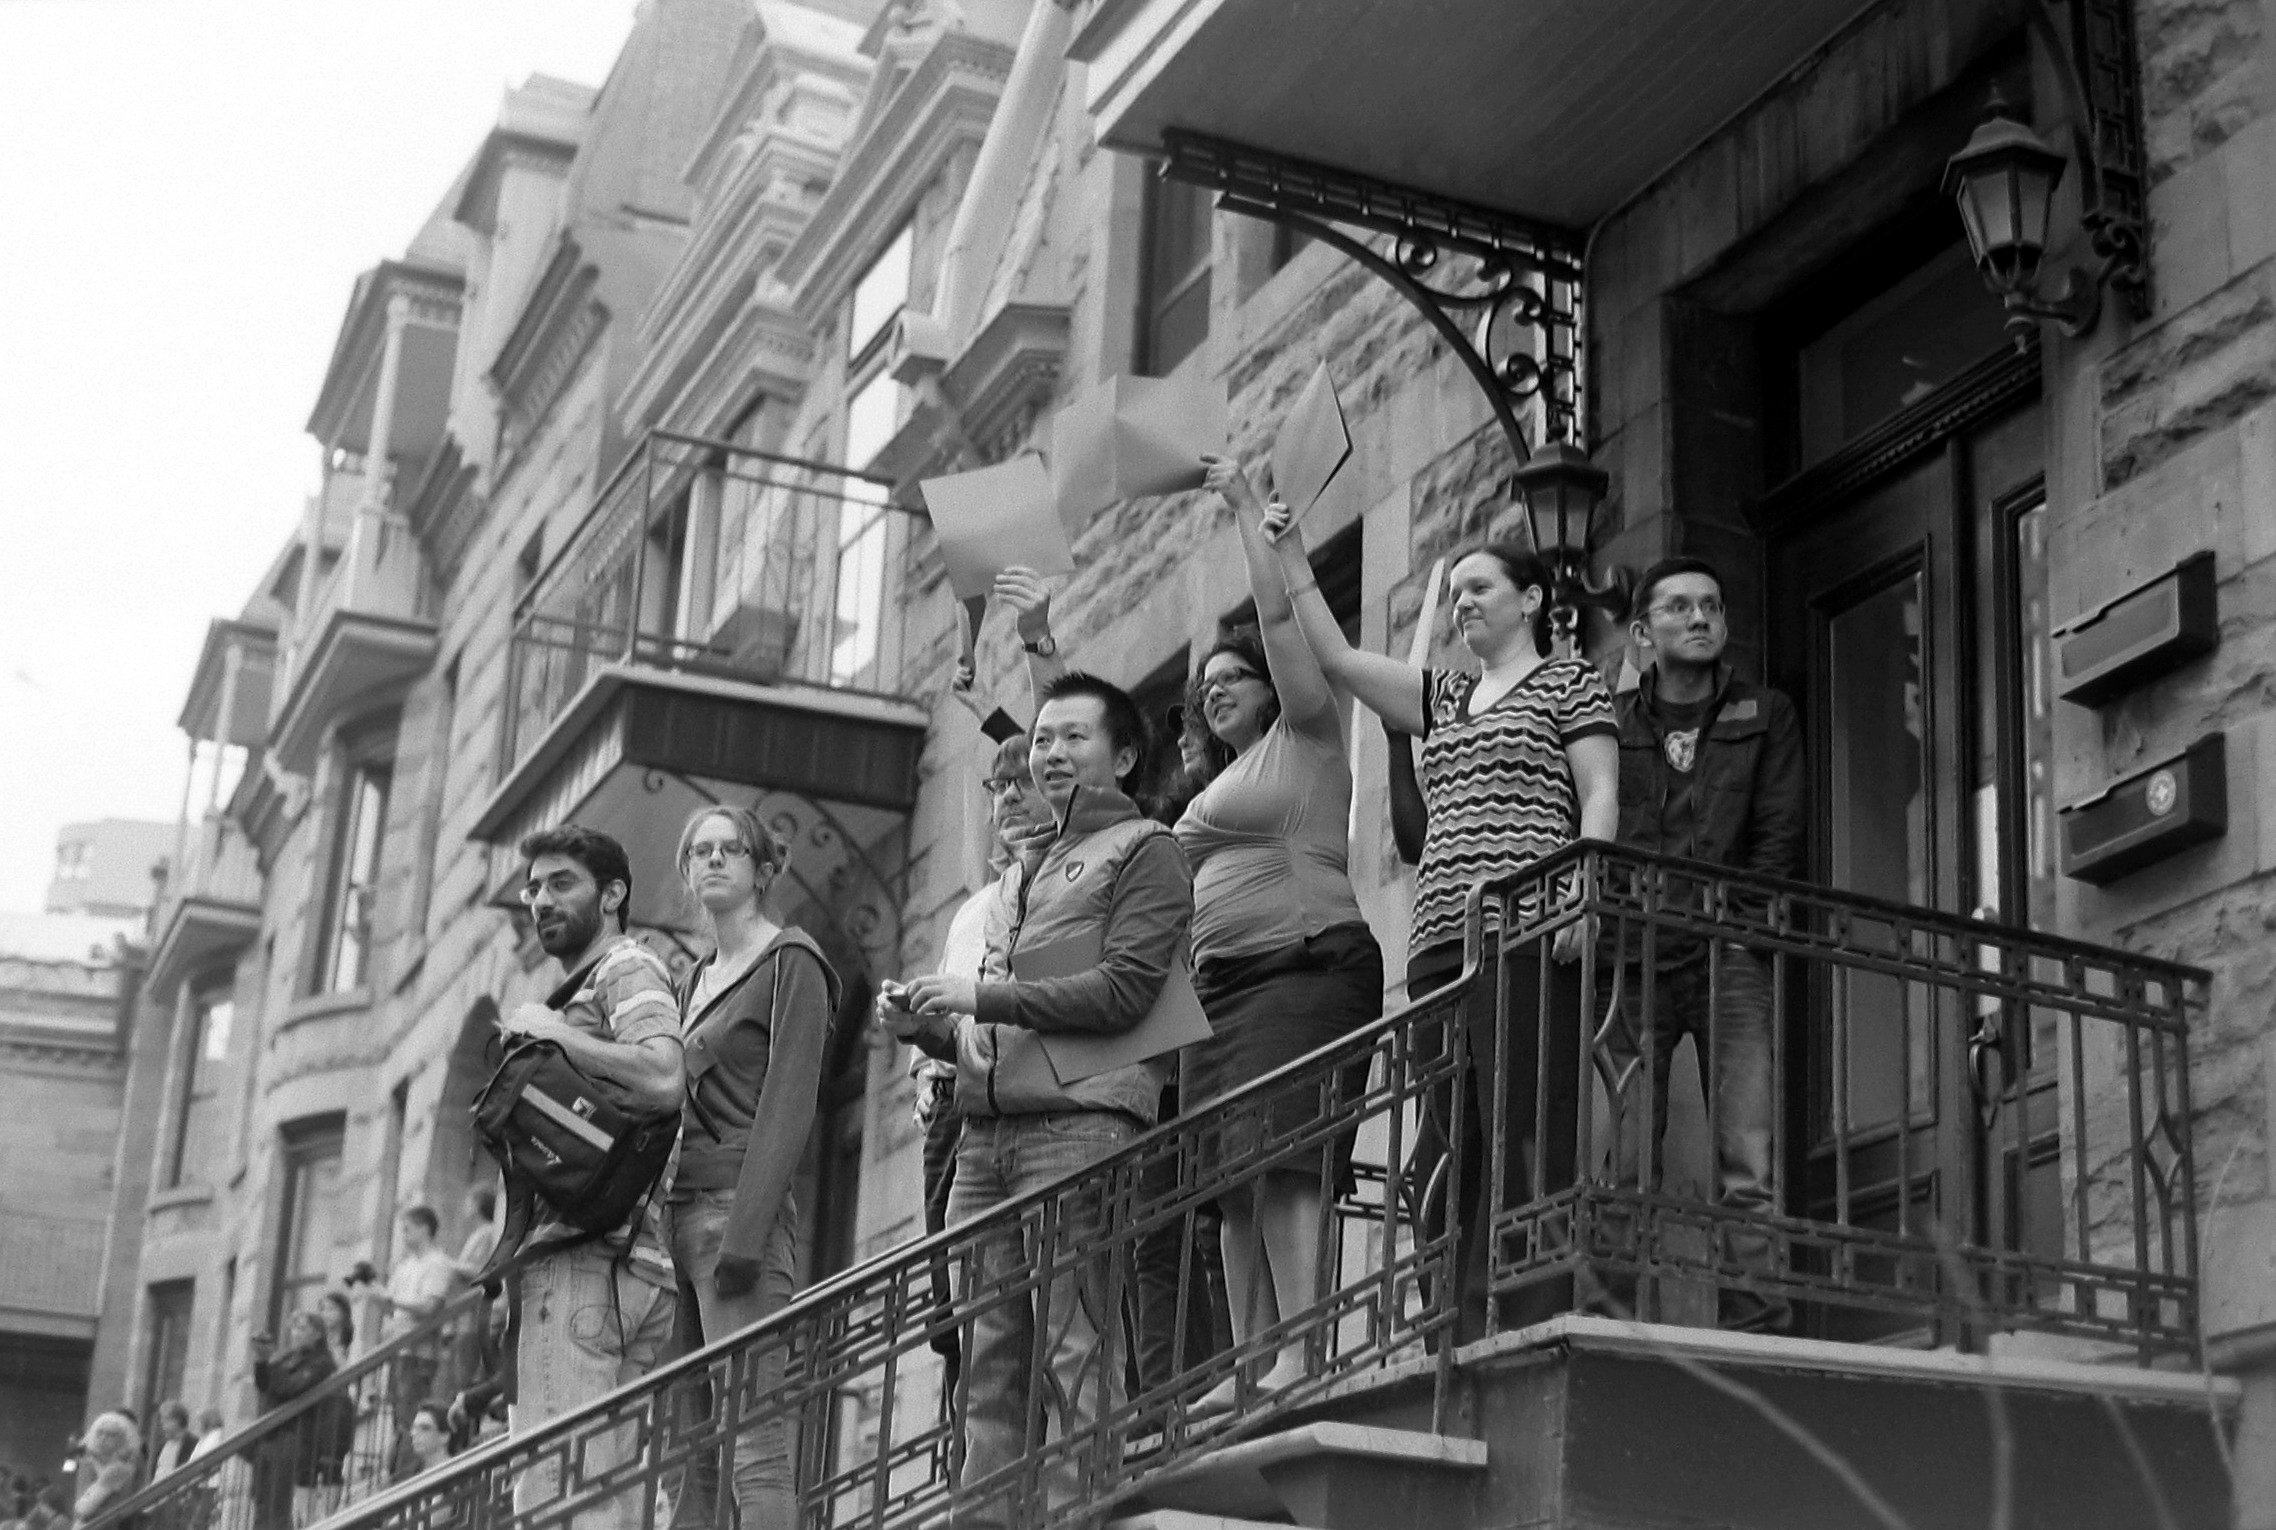 Cheers from the balcony (student protests in Montreal, Quebec, Canada)